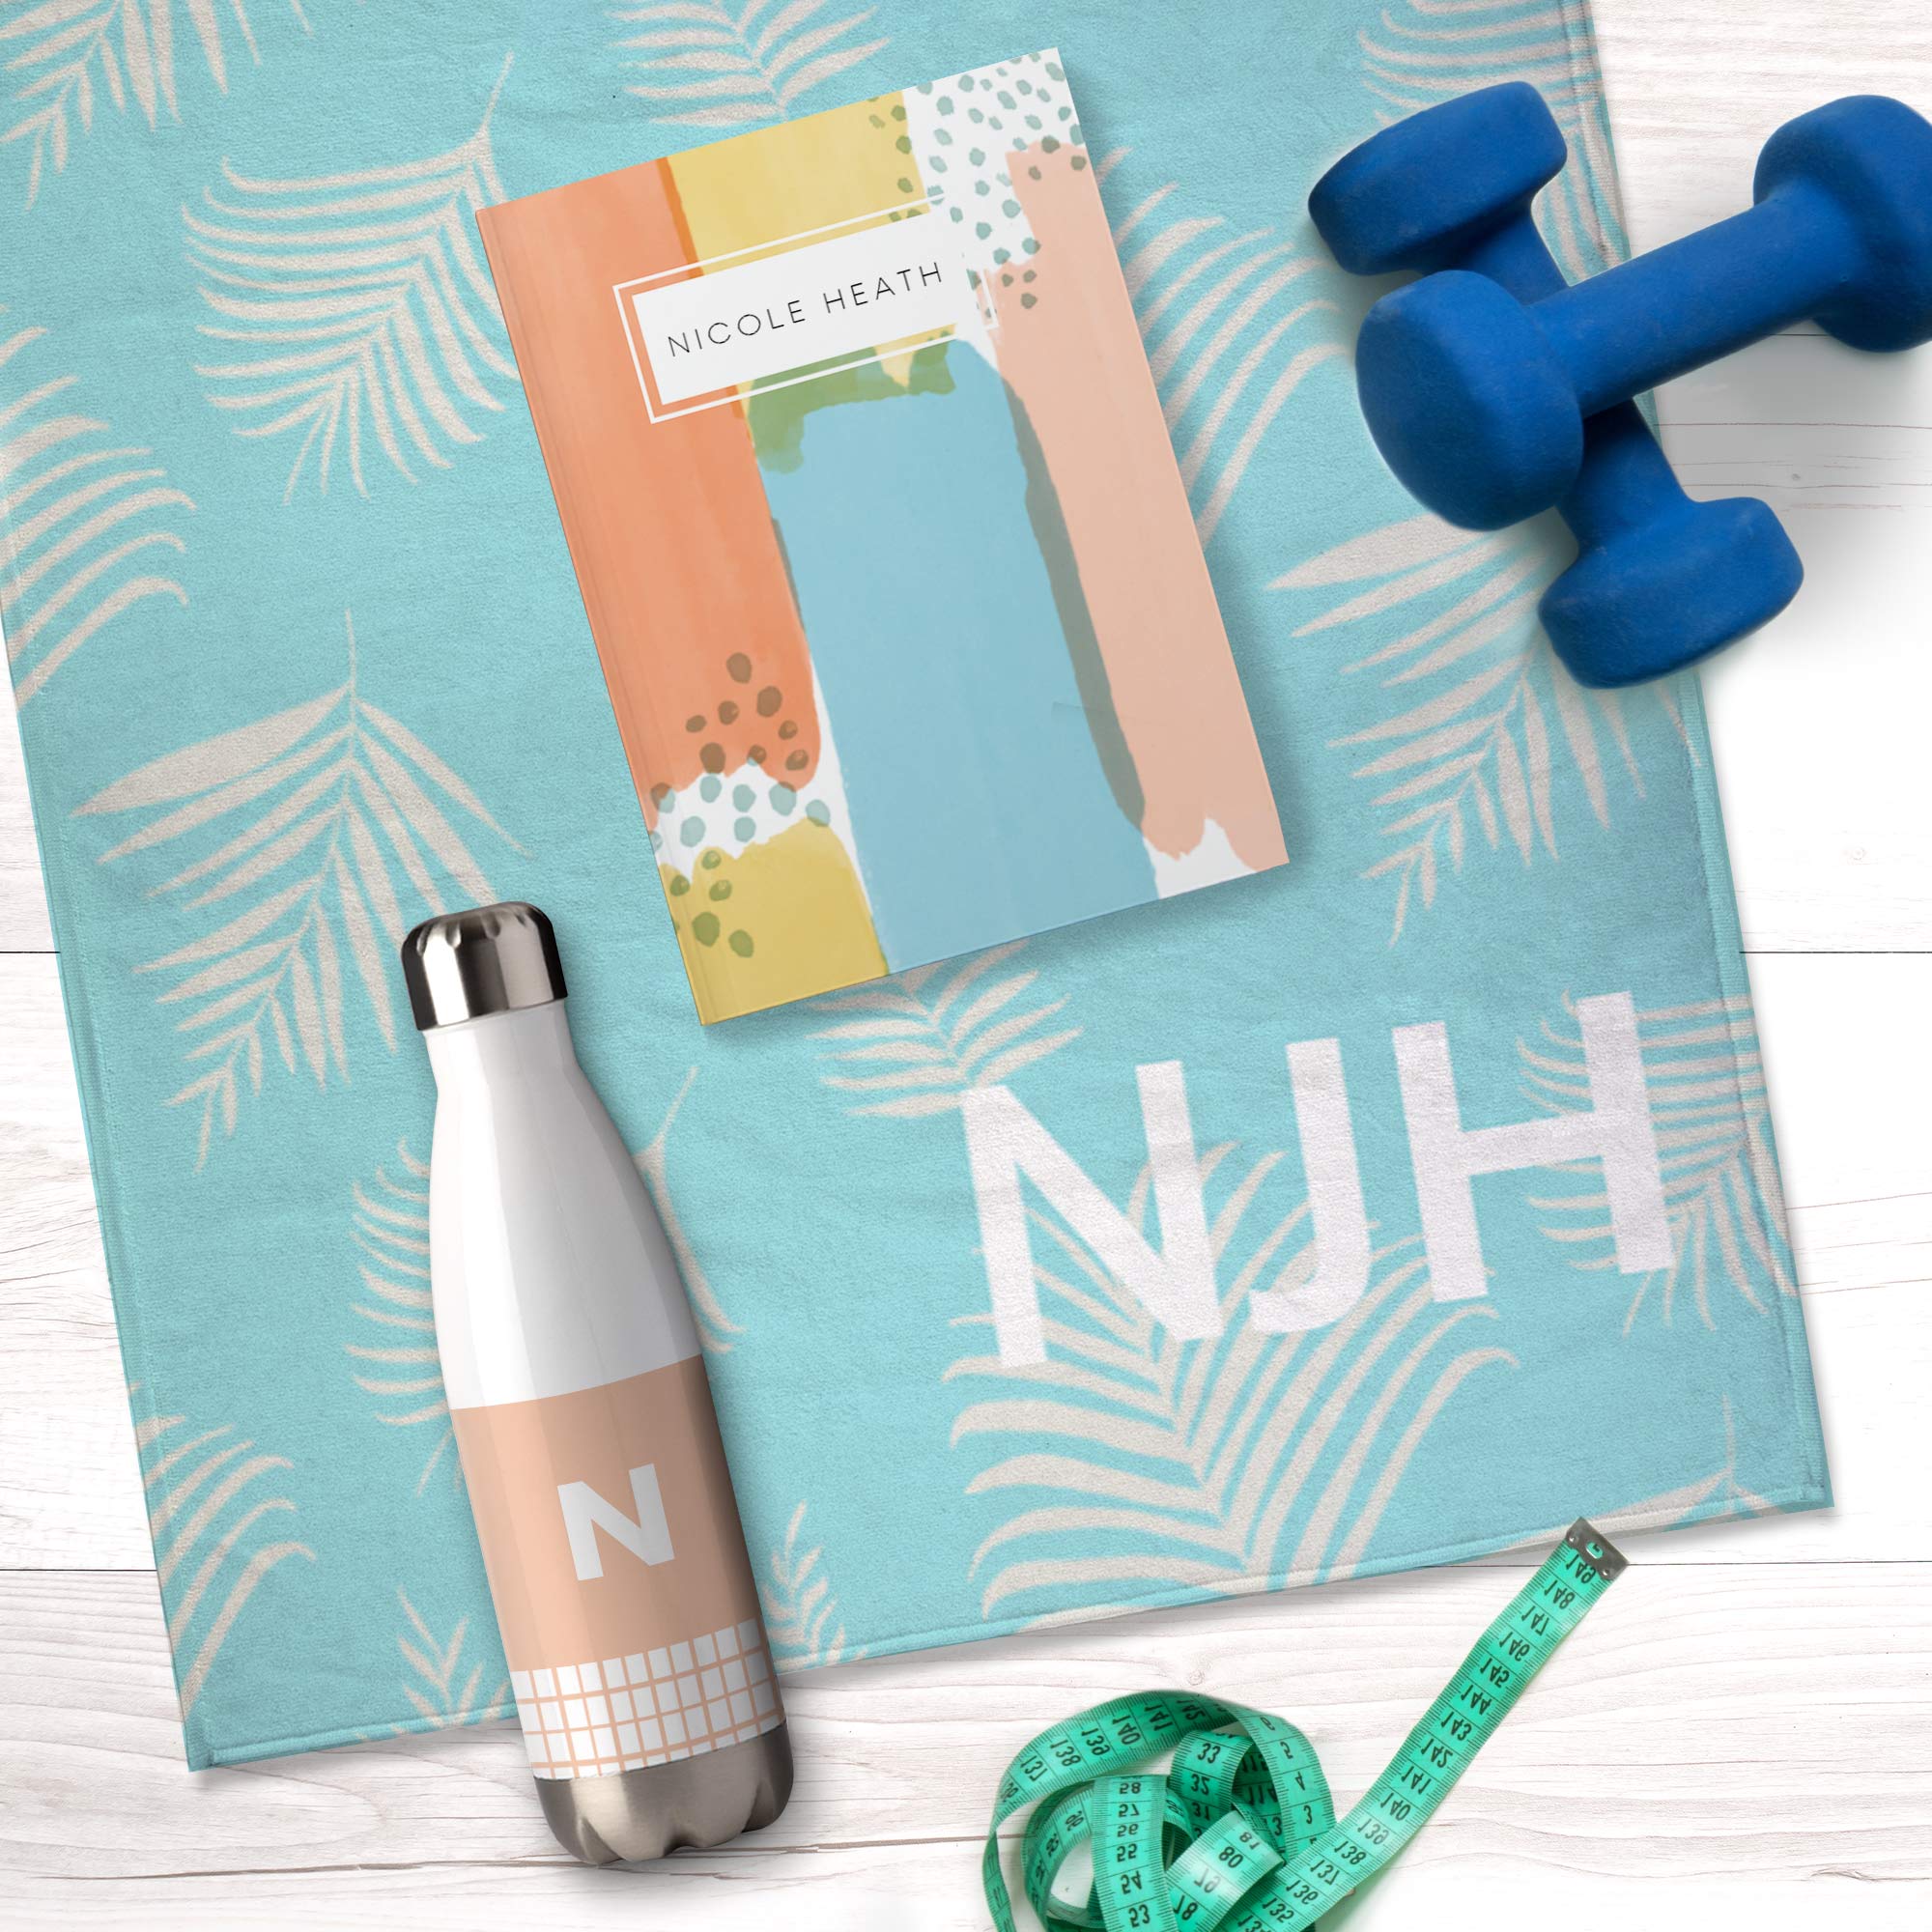 Personalised Gym Accessories that are Custom #FitnessGoals